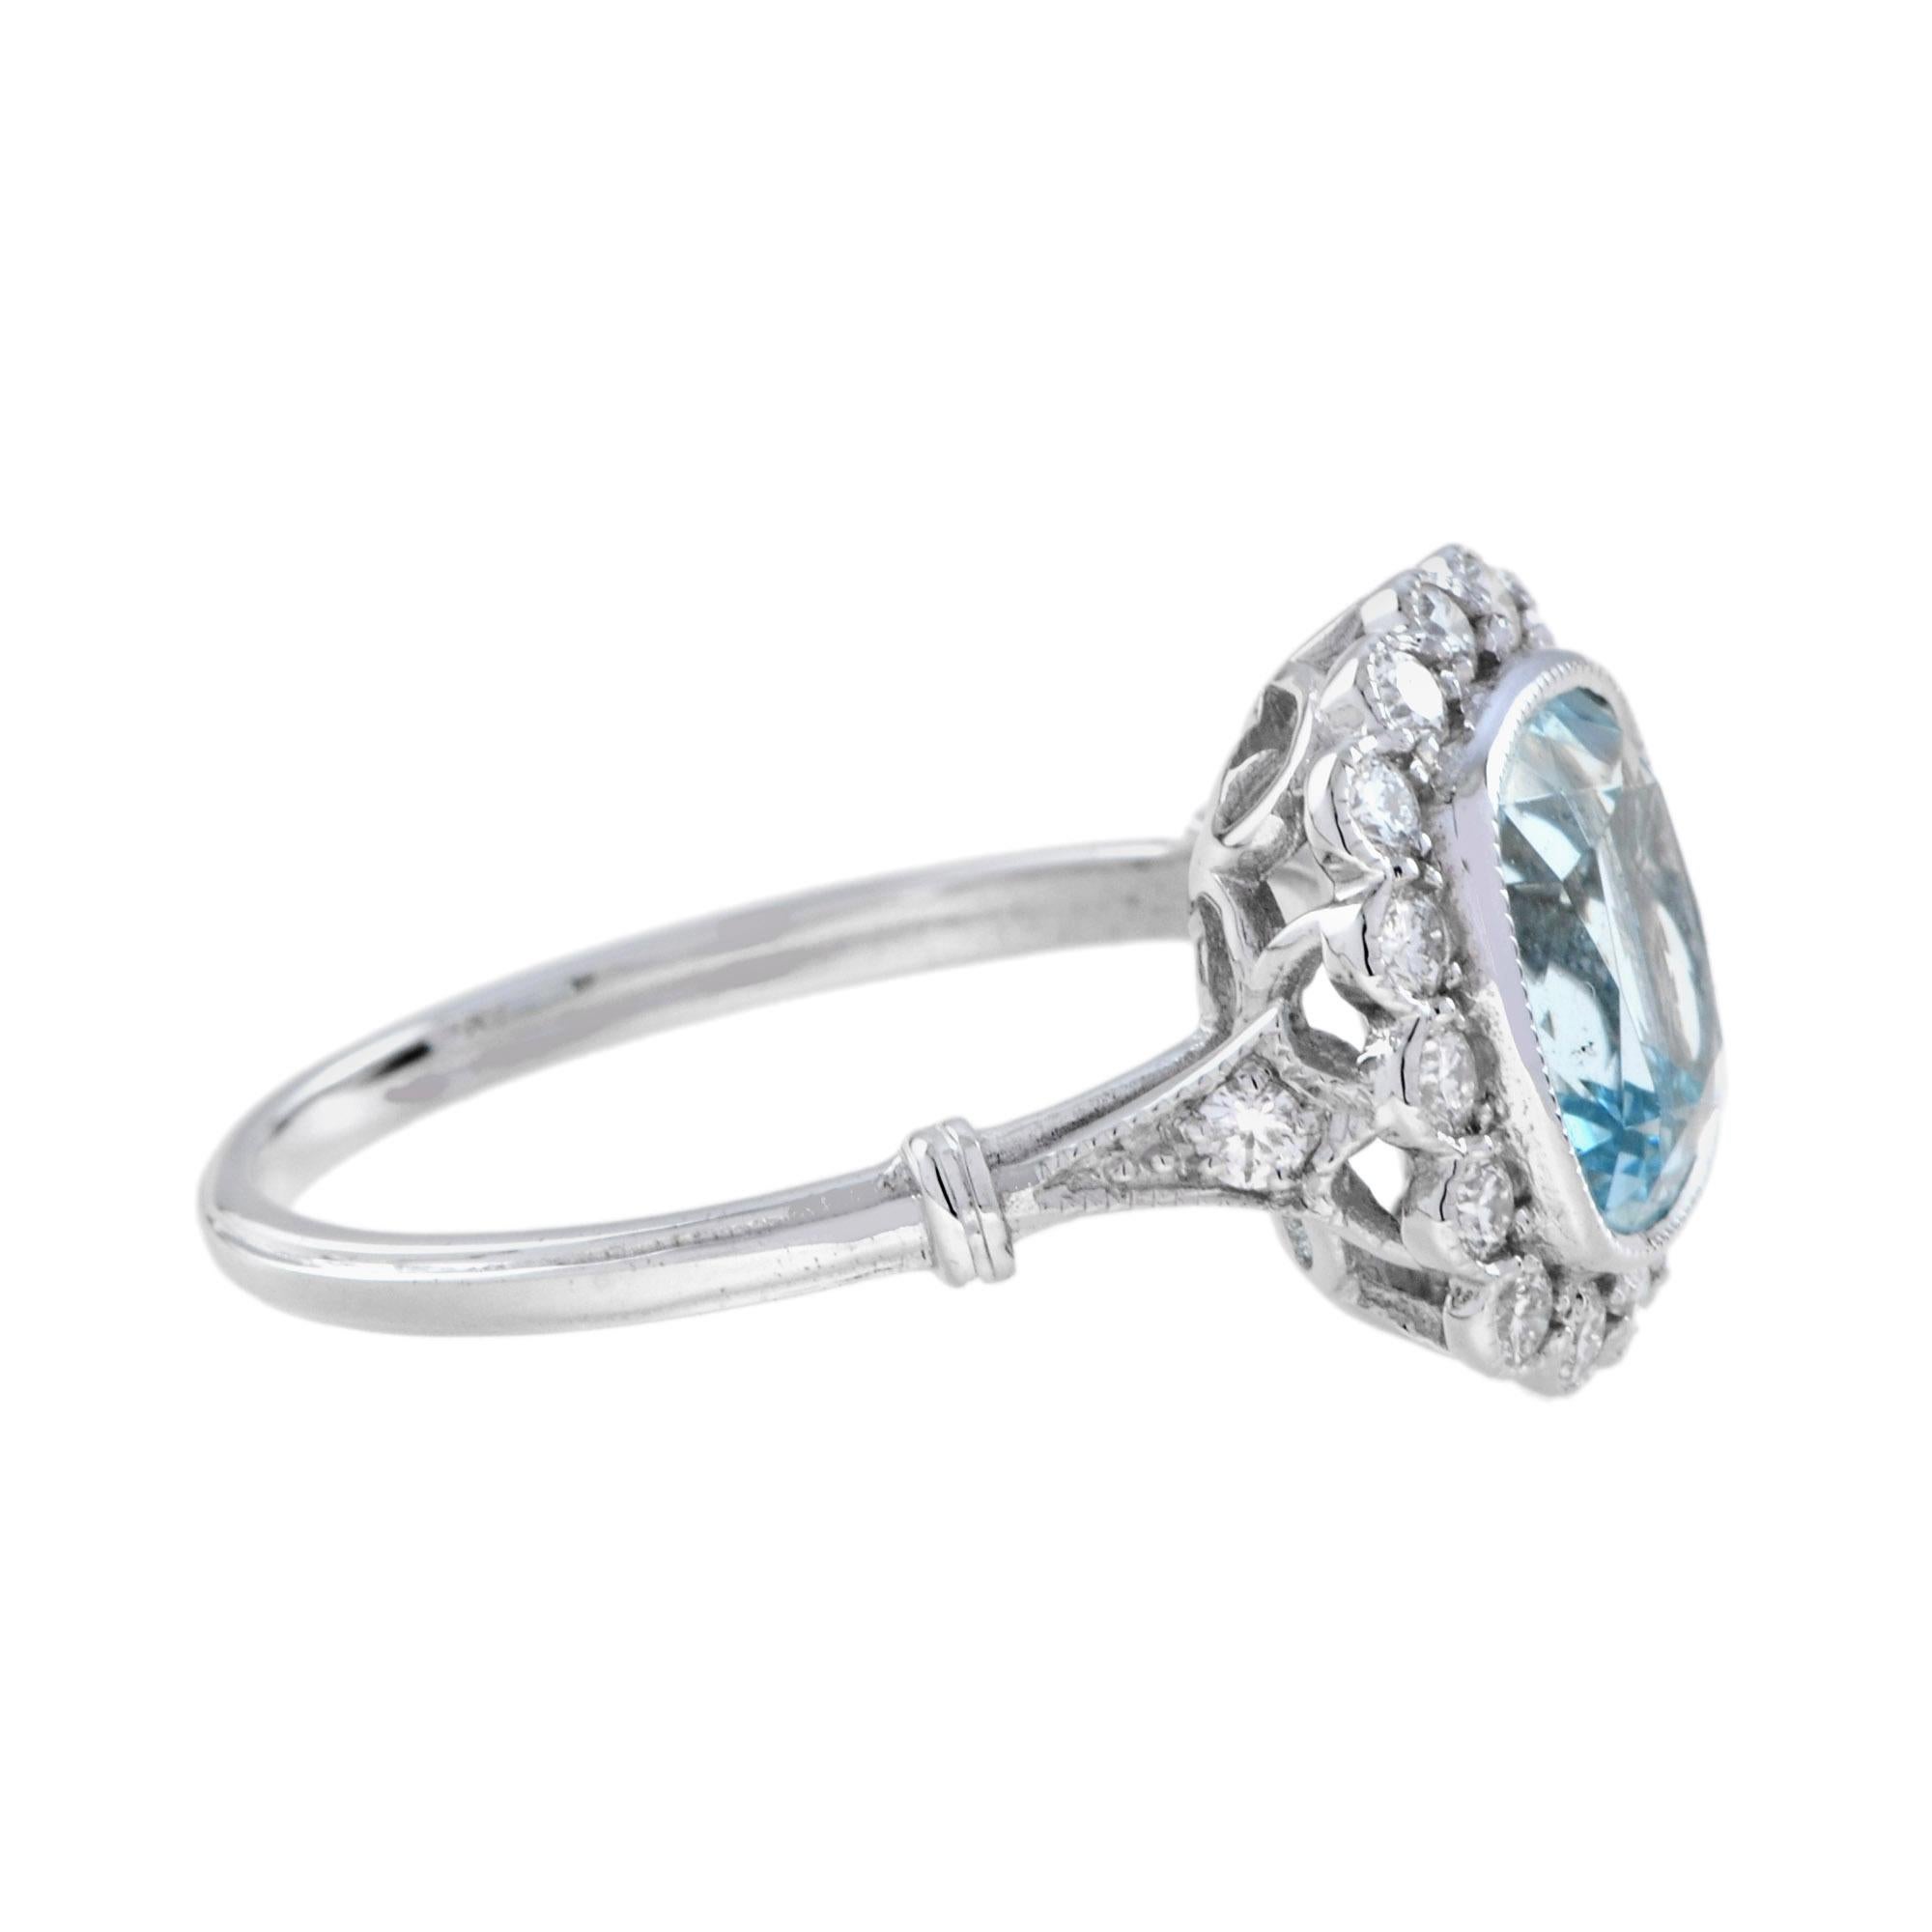 For Sale:  Cushion Aquamarine and Diamond Halo Ring in 18K White Gold 6